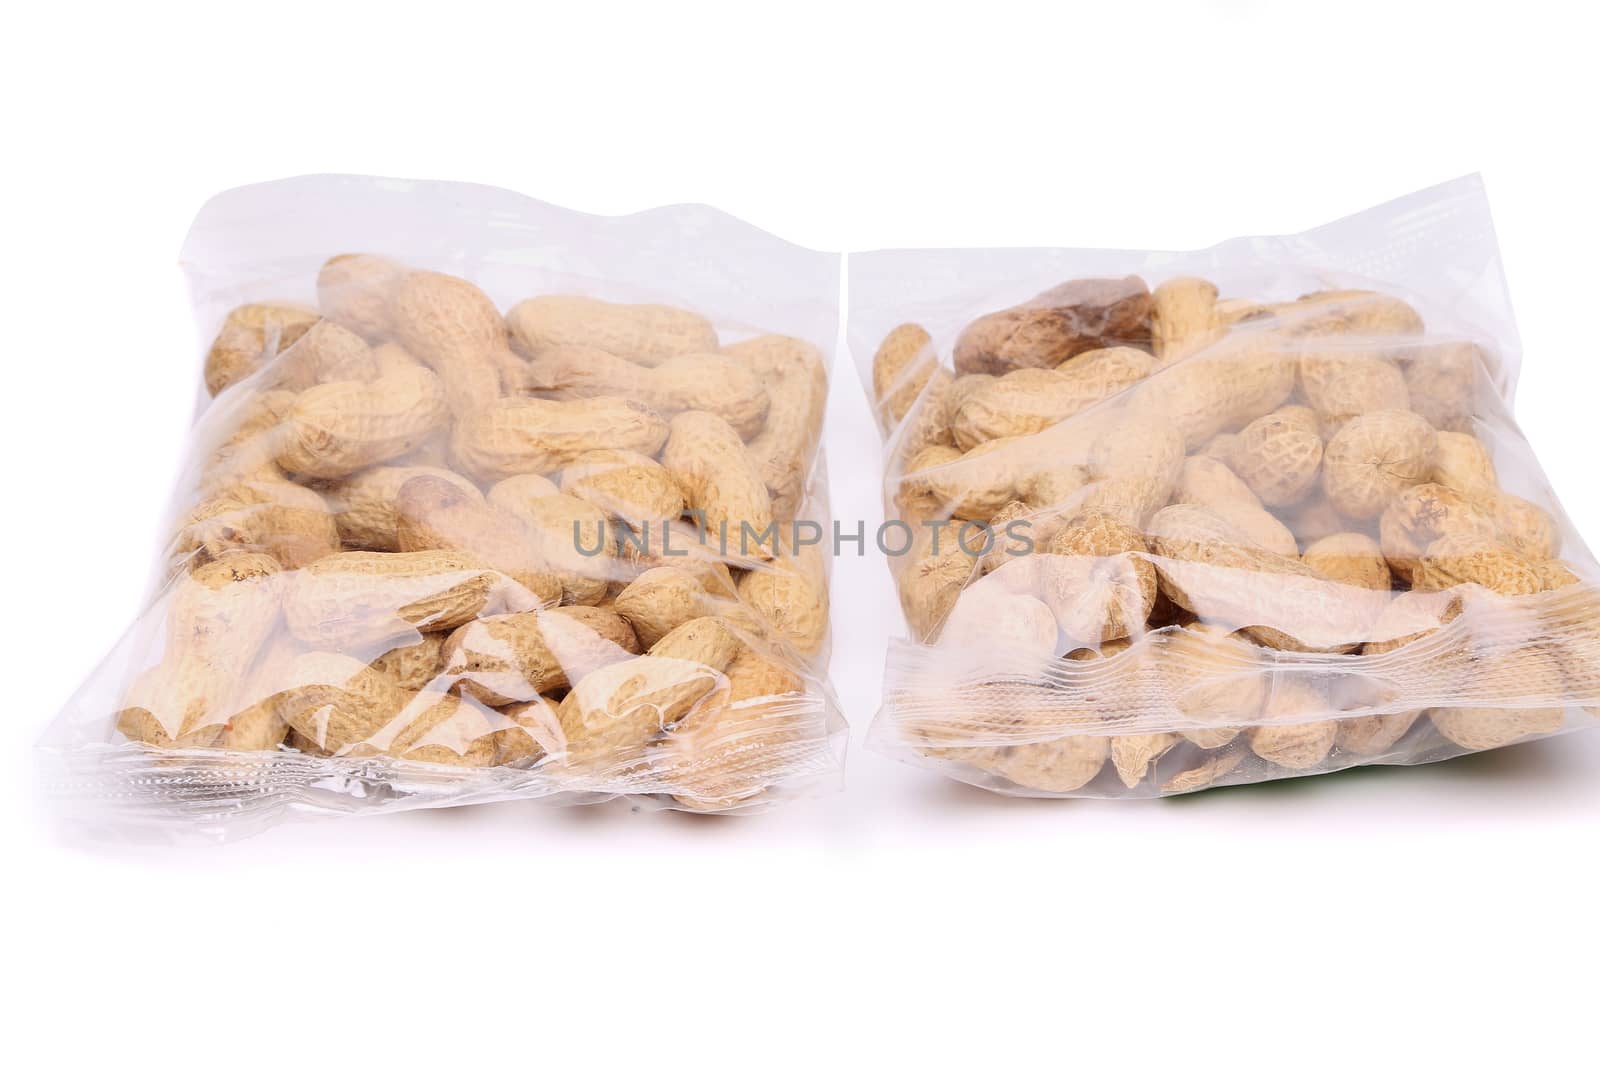 Two large plastic bags of peanuts by indigolotos